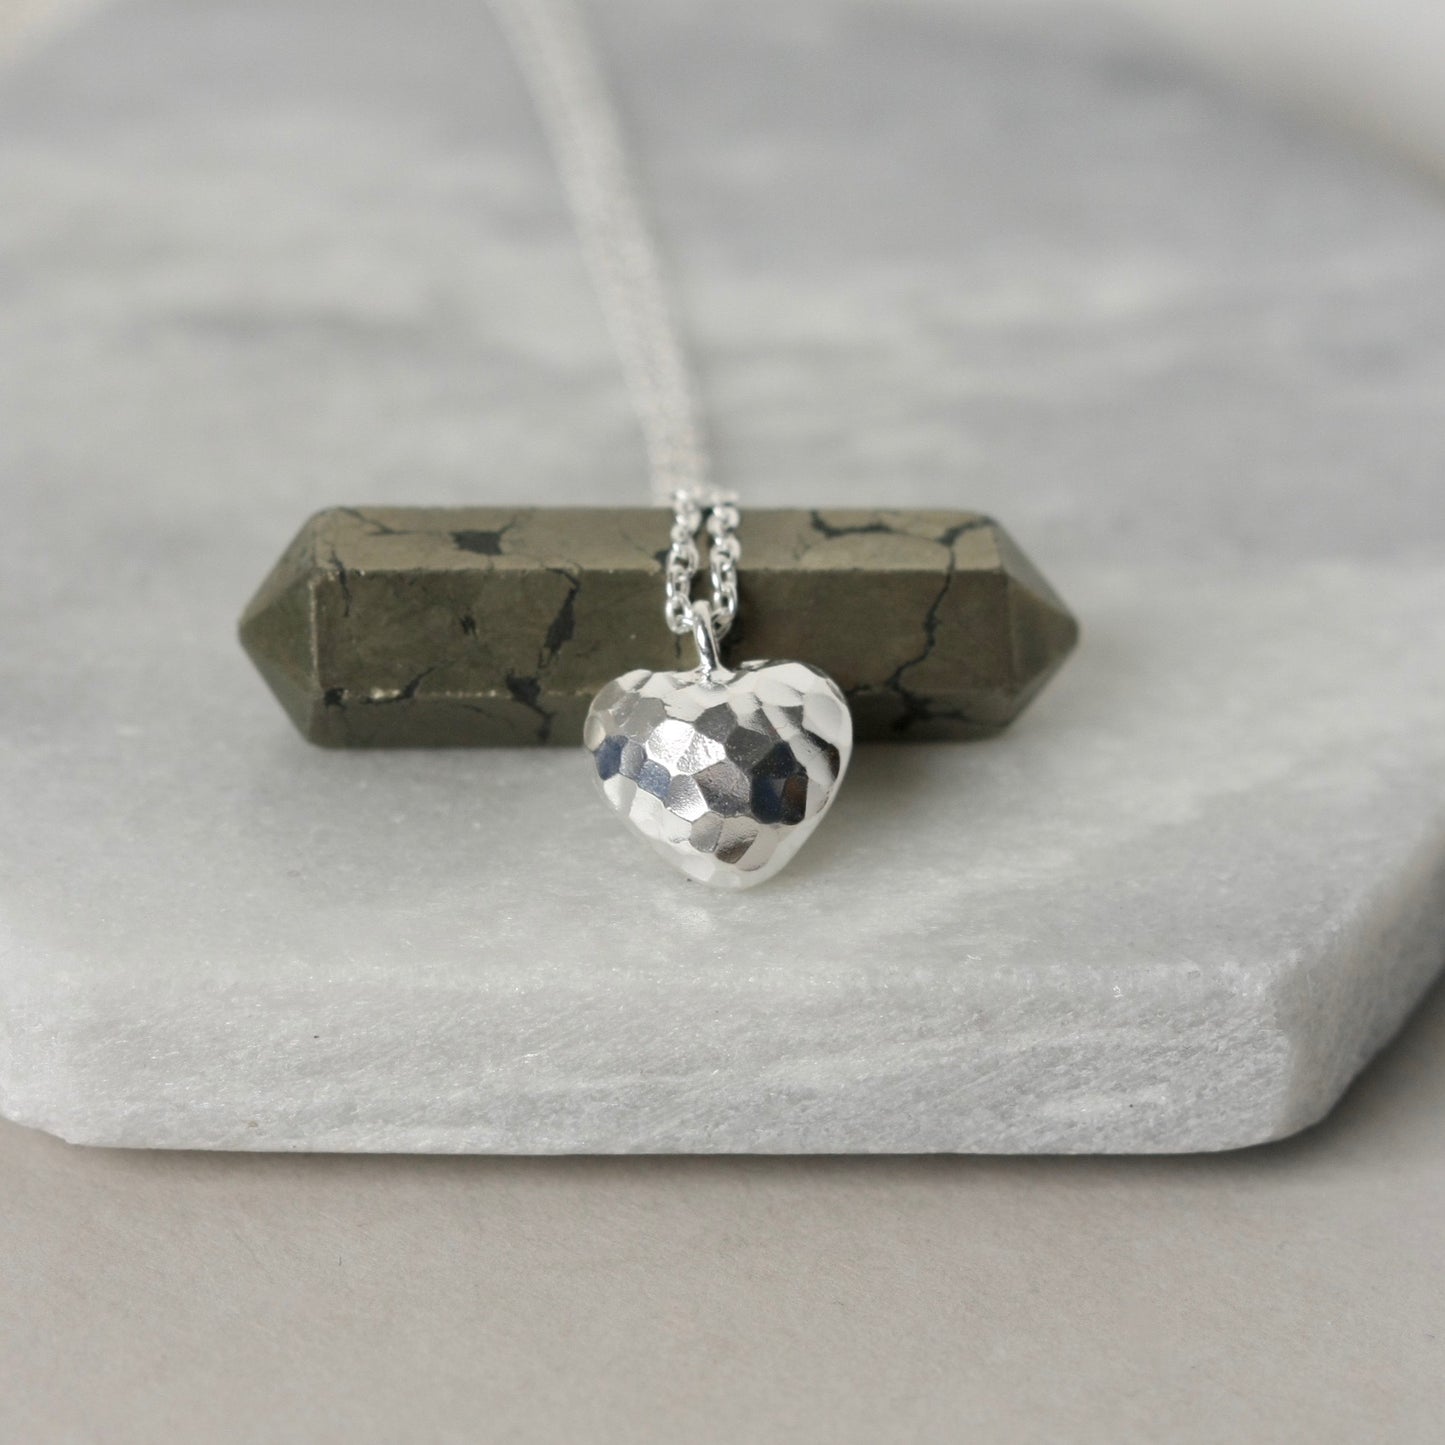 Silver Hammered 3D Heart Necklace